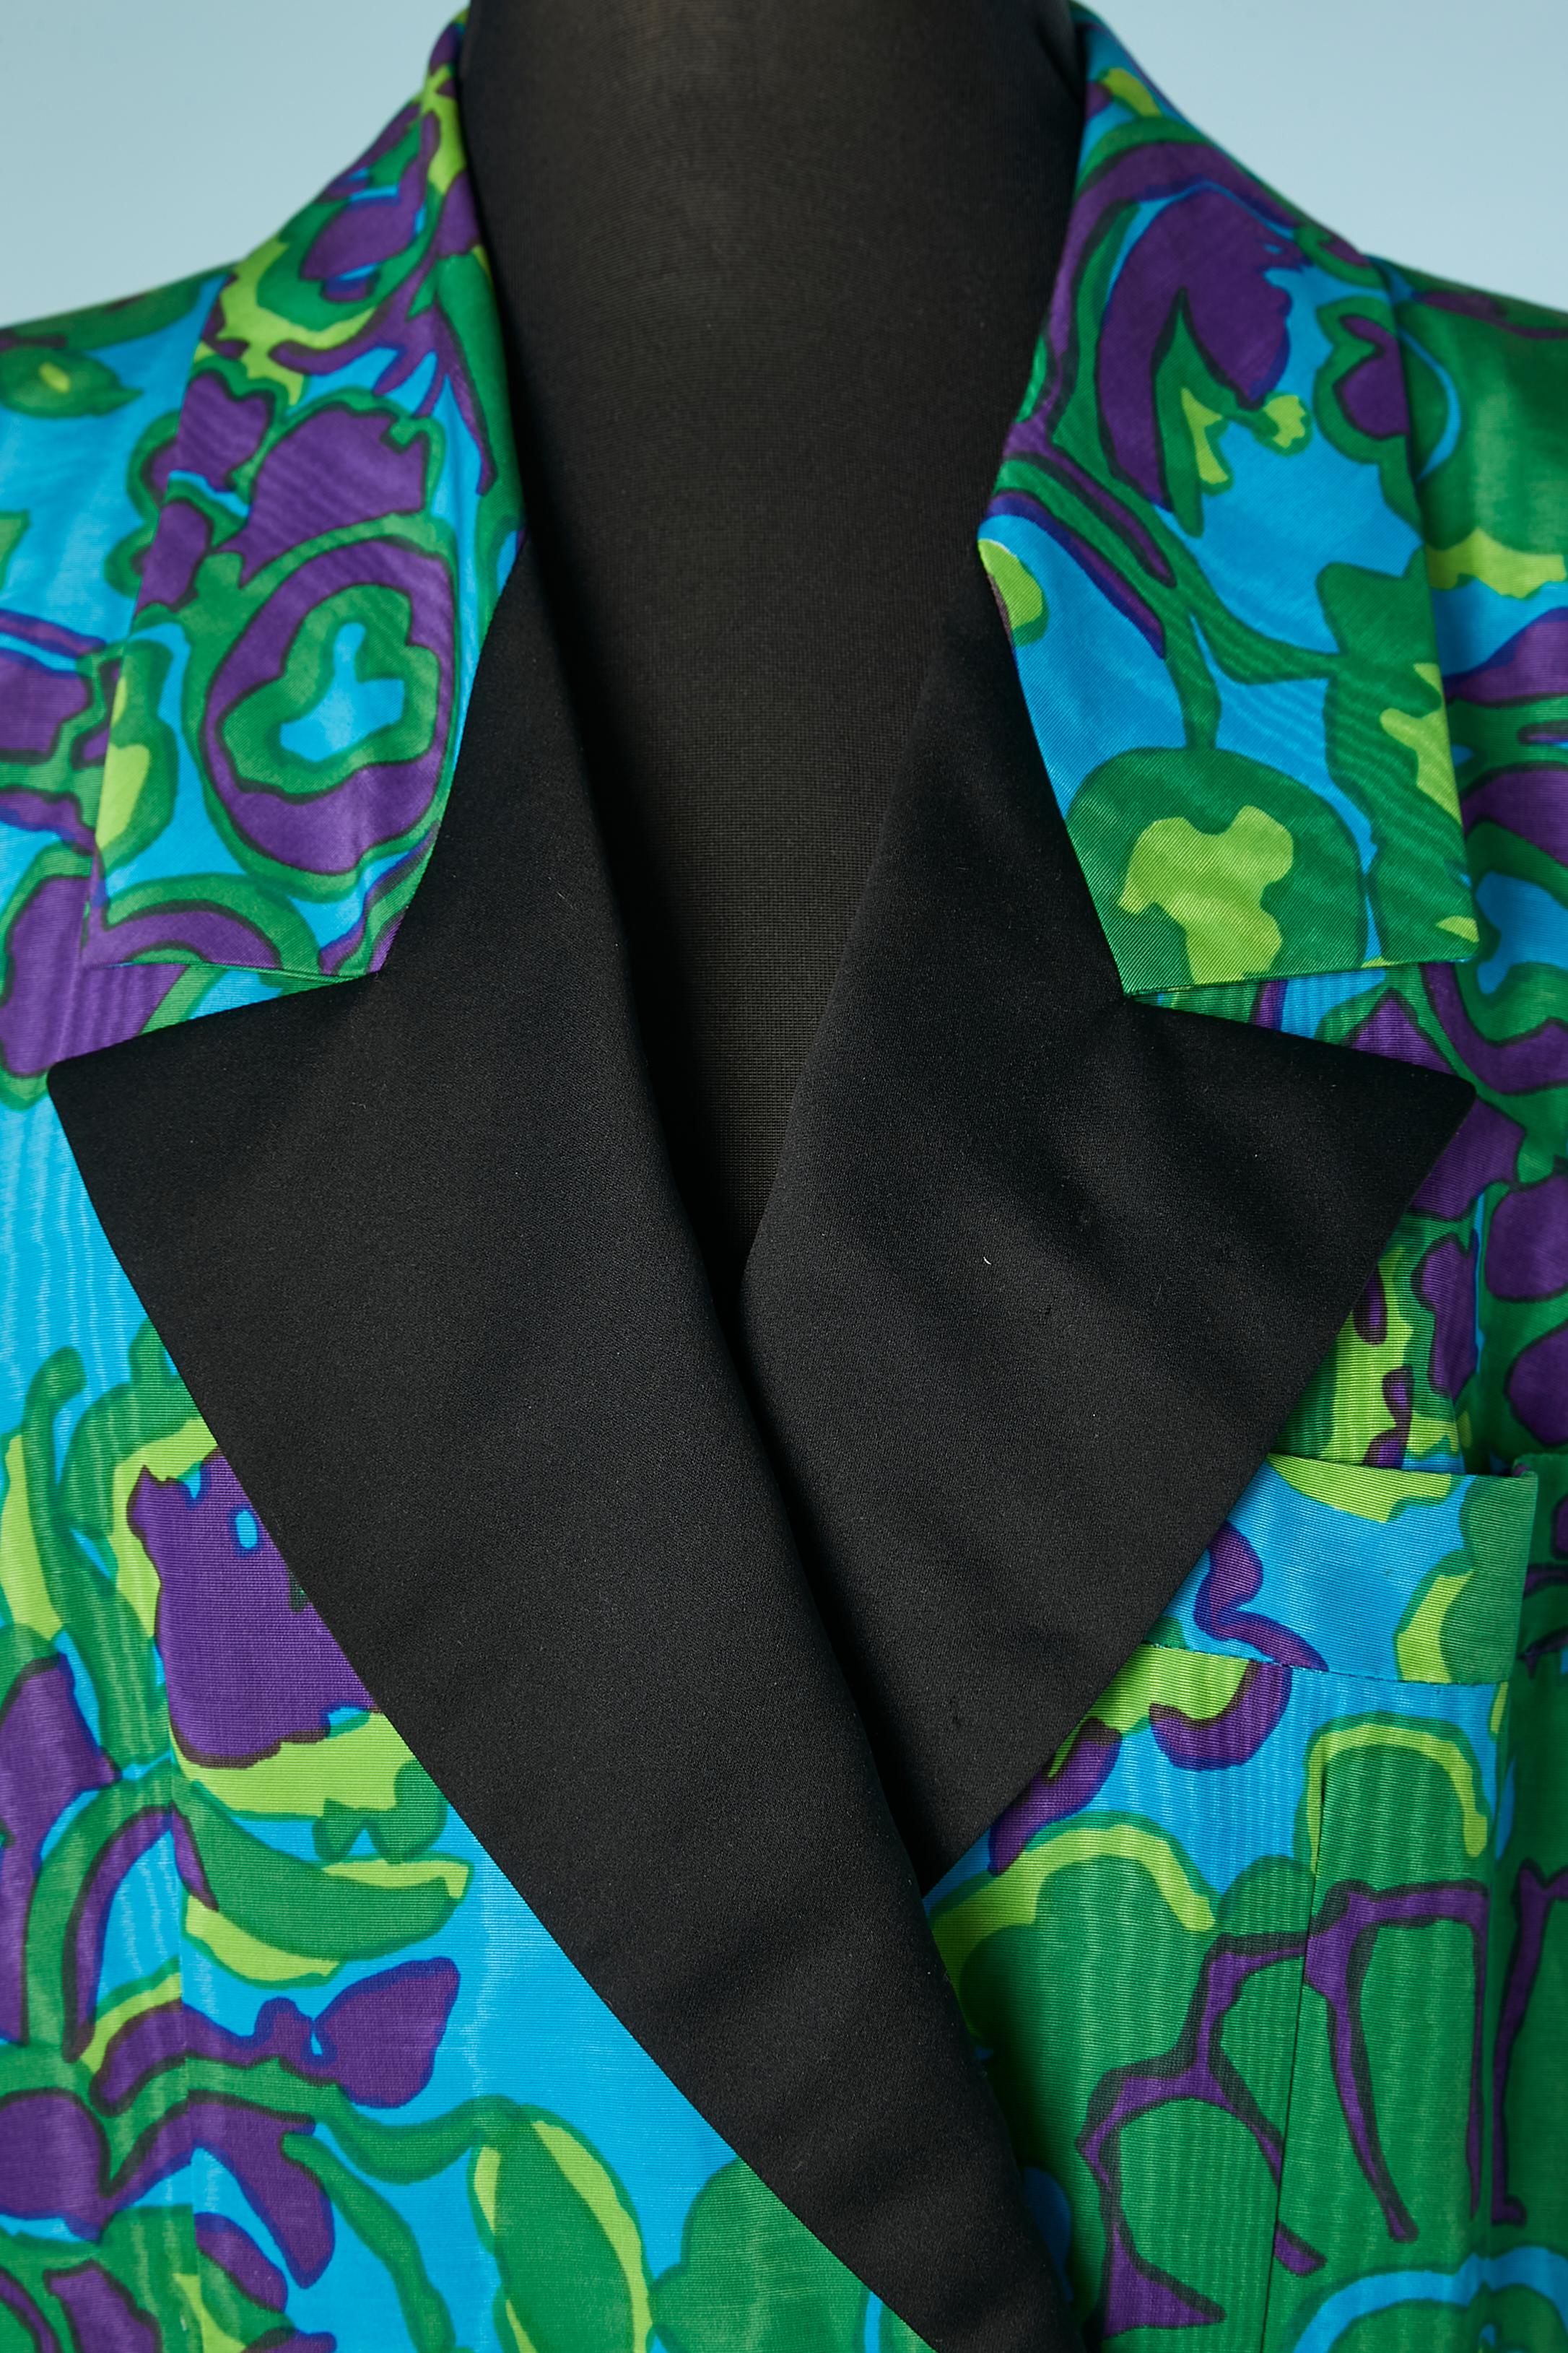 Multicolor printed moiré tuxedo double breasted jacket.Shoulder pads.  Fabric composition: 44% rayon, 66% cotton. 100% Silk lining. FW 1990 
SIZE TAG IS 36 but more likely 38 (M) 